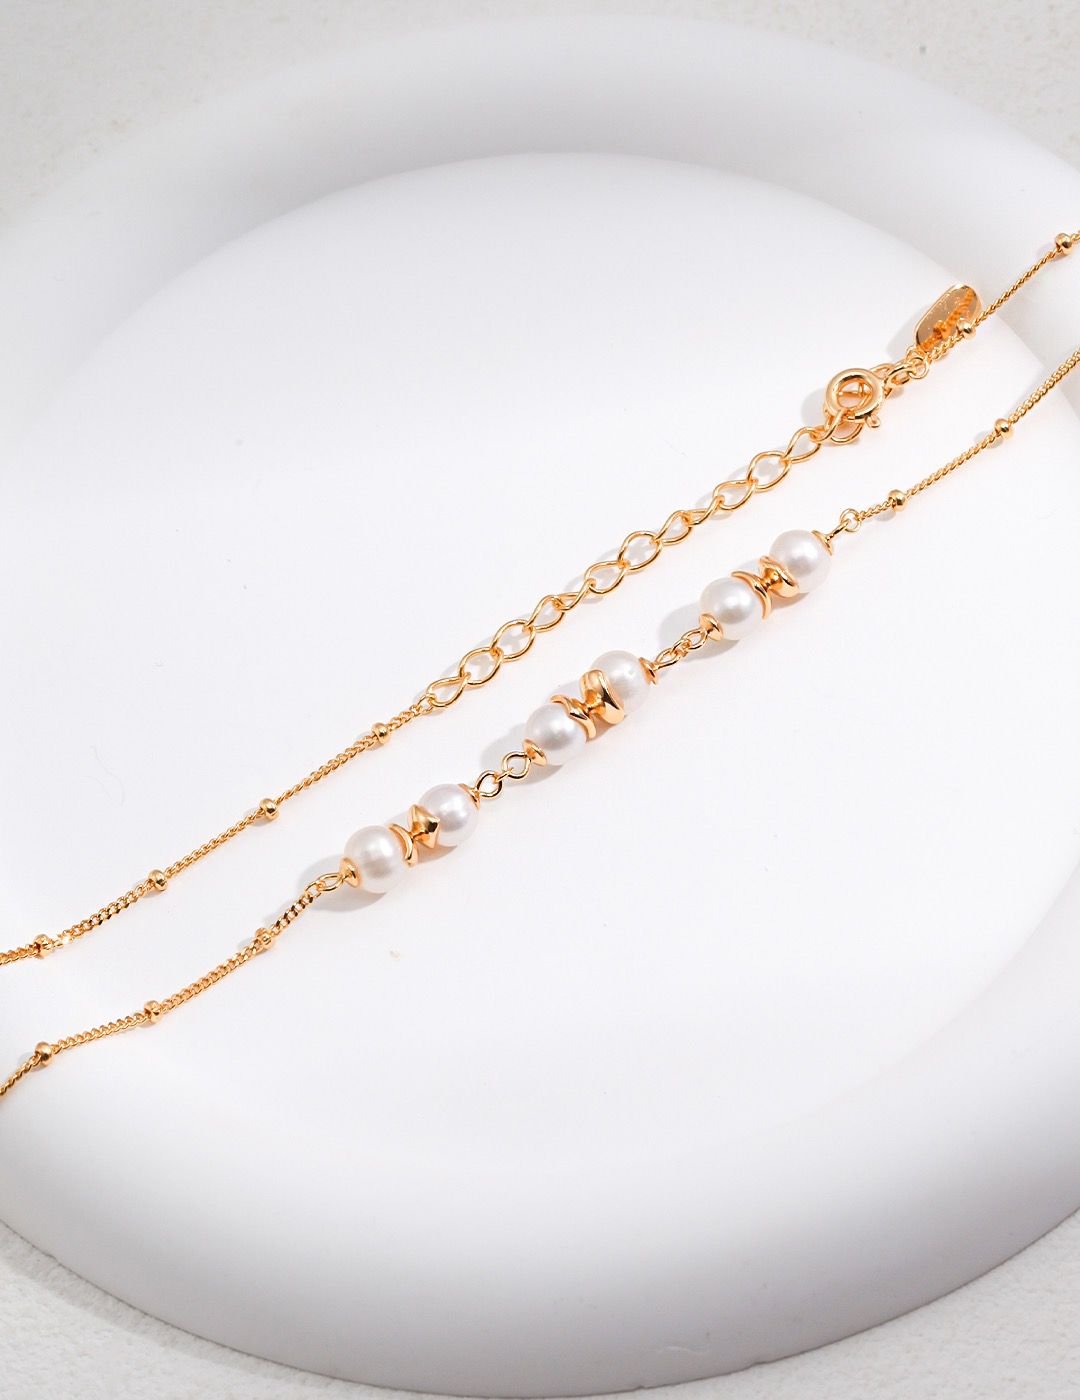 Single strand pearl necklace with freshwater pearls